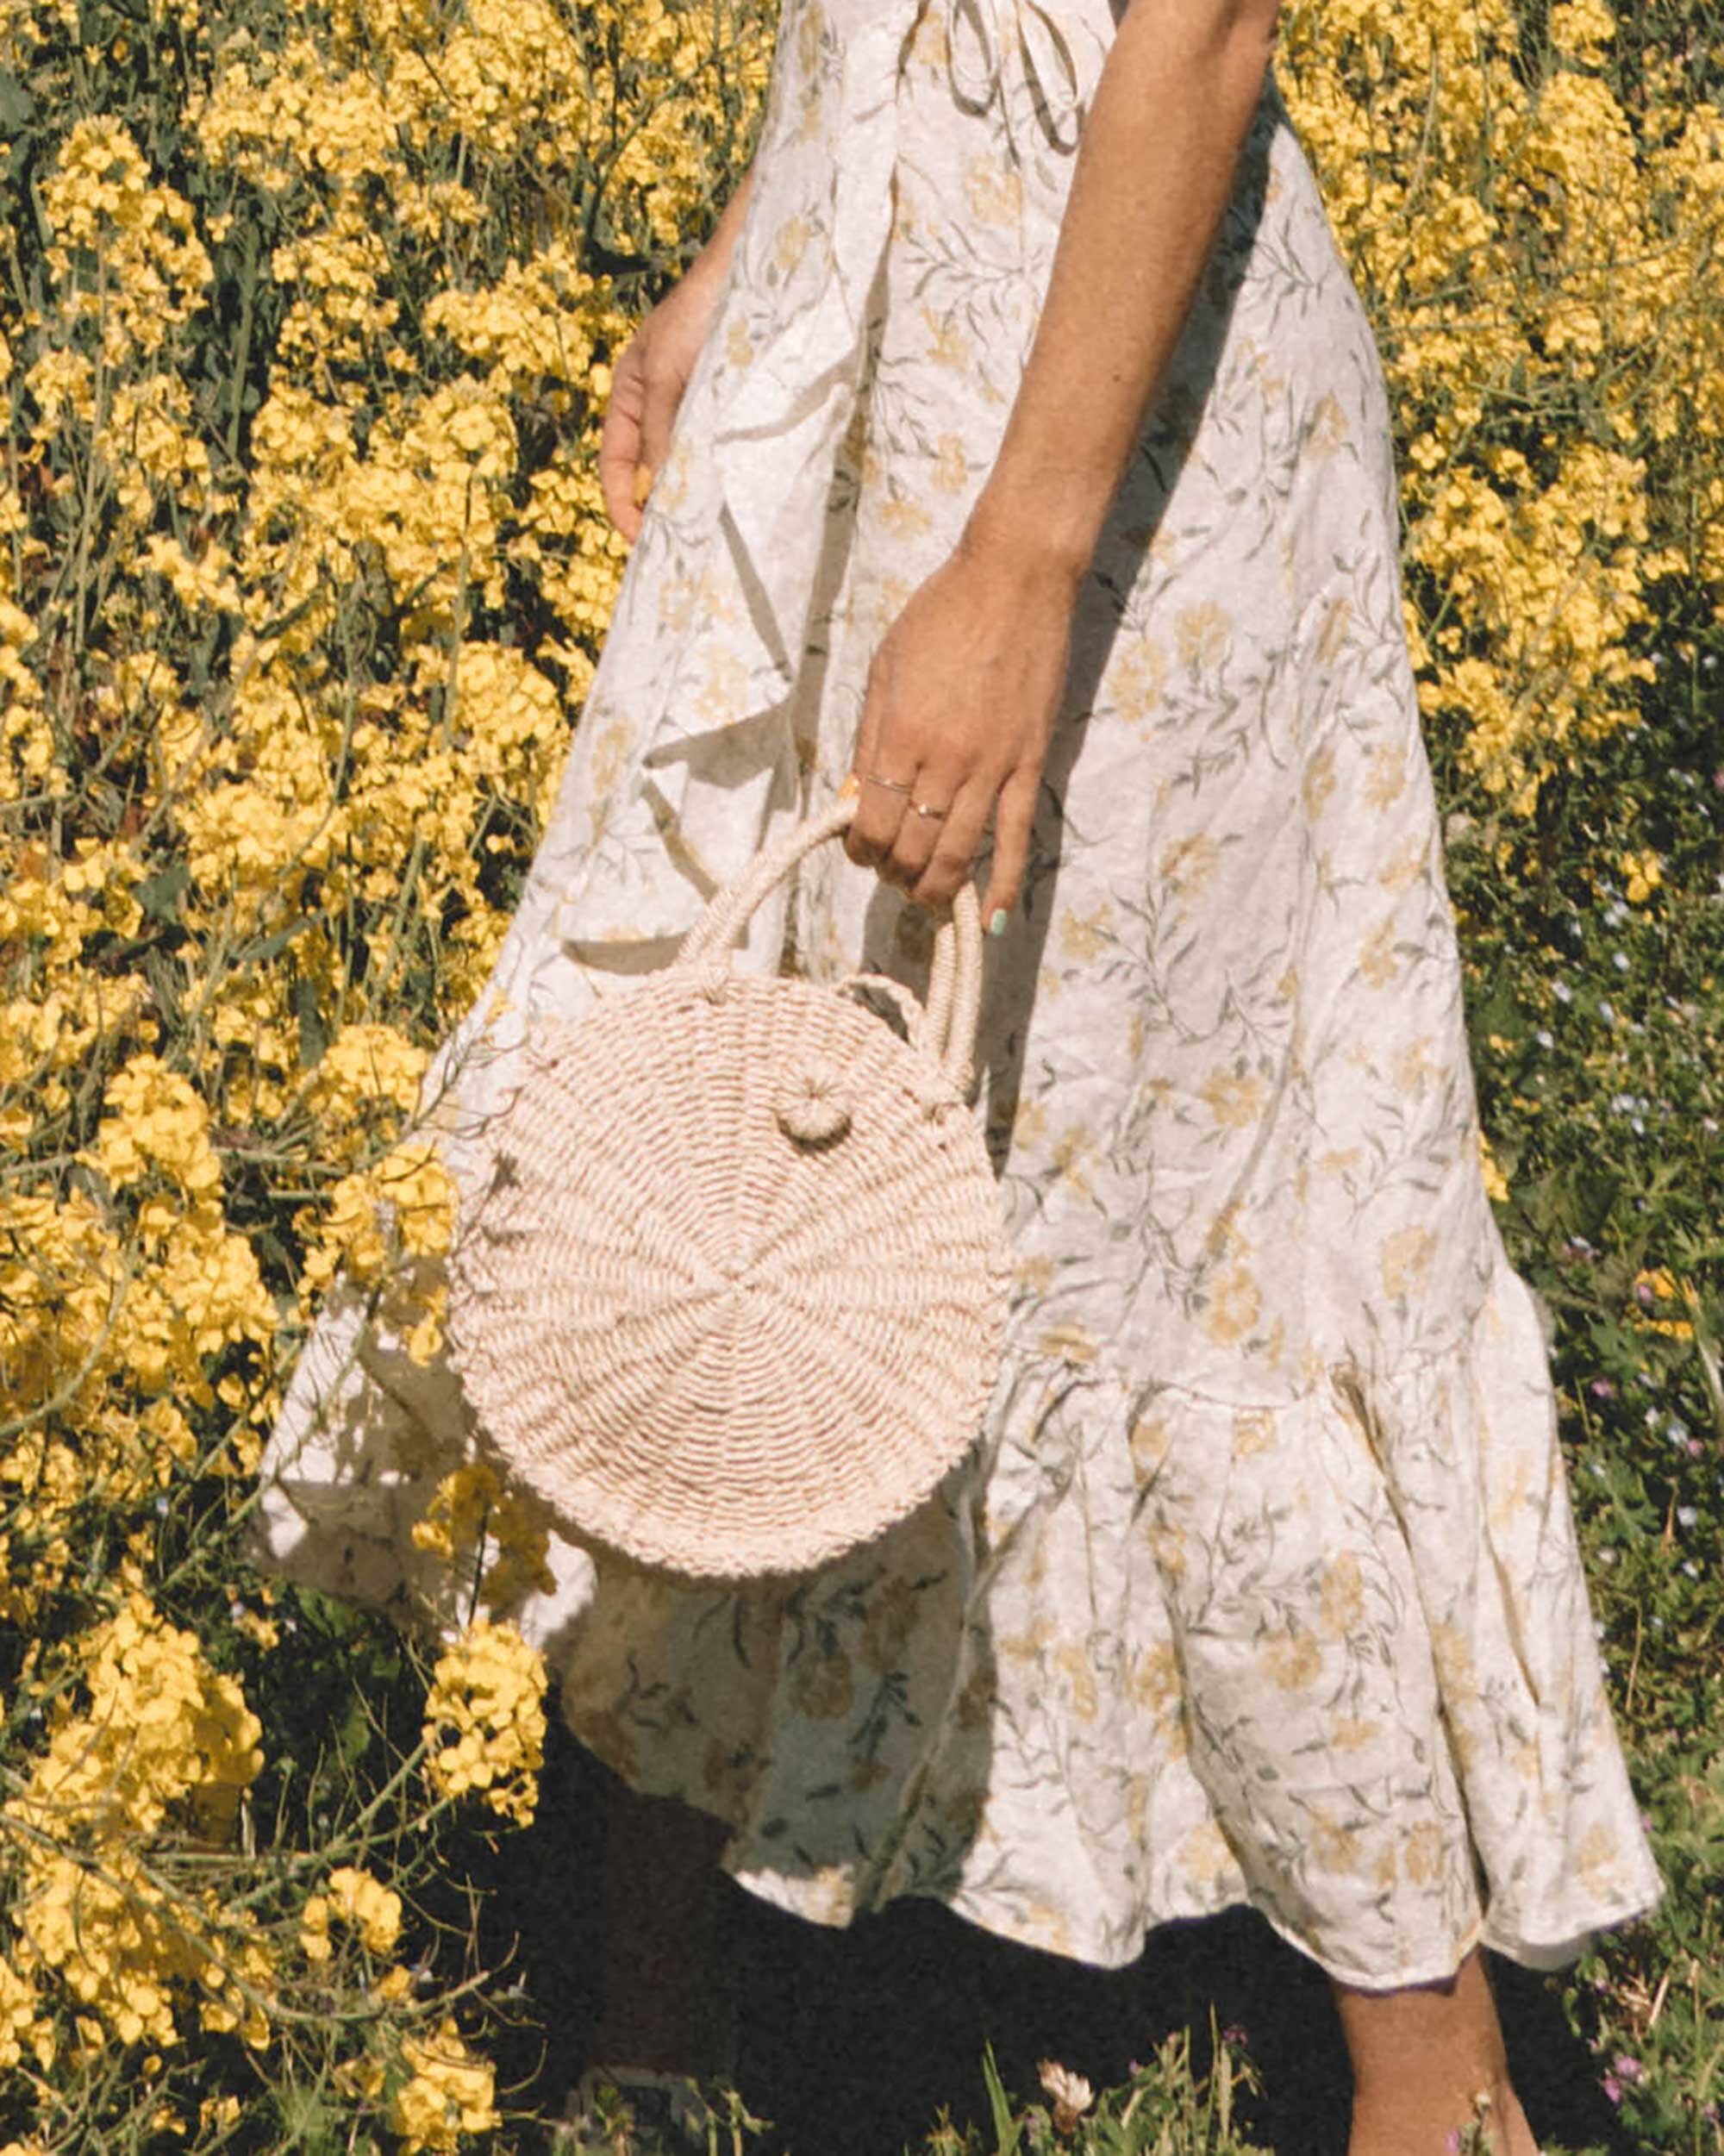 Sarah+Butler+of+Sarah+Styles+Seattle+wears+And+Other+Stories+Ruffled+Linen+Wrap+Midi+Dress+and+round+woven+bag+in+England+Countryside+for+the+perfect+floral+summer+dress+|+@sarahchristine+-3-2.jpg